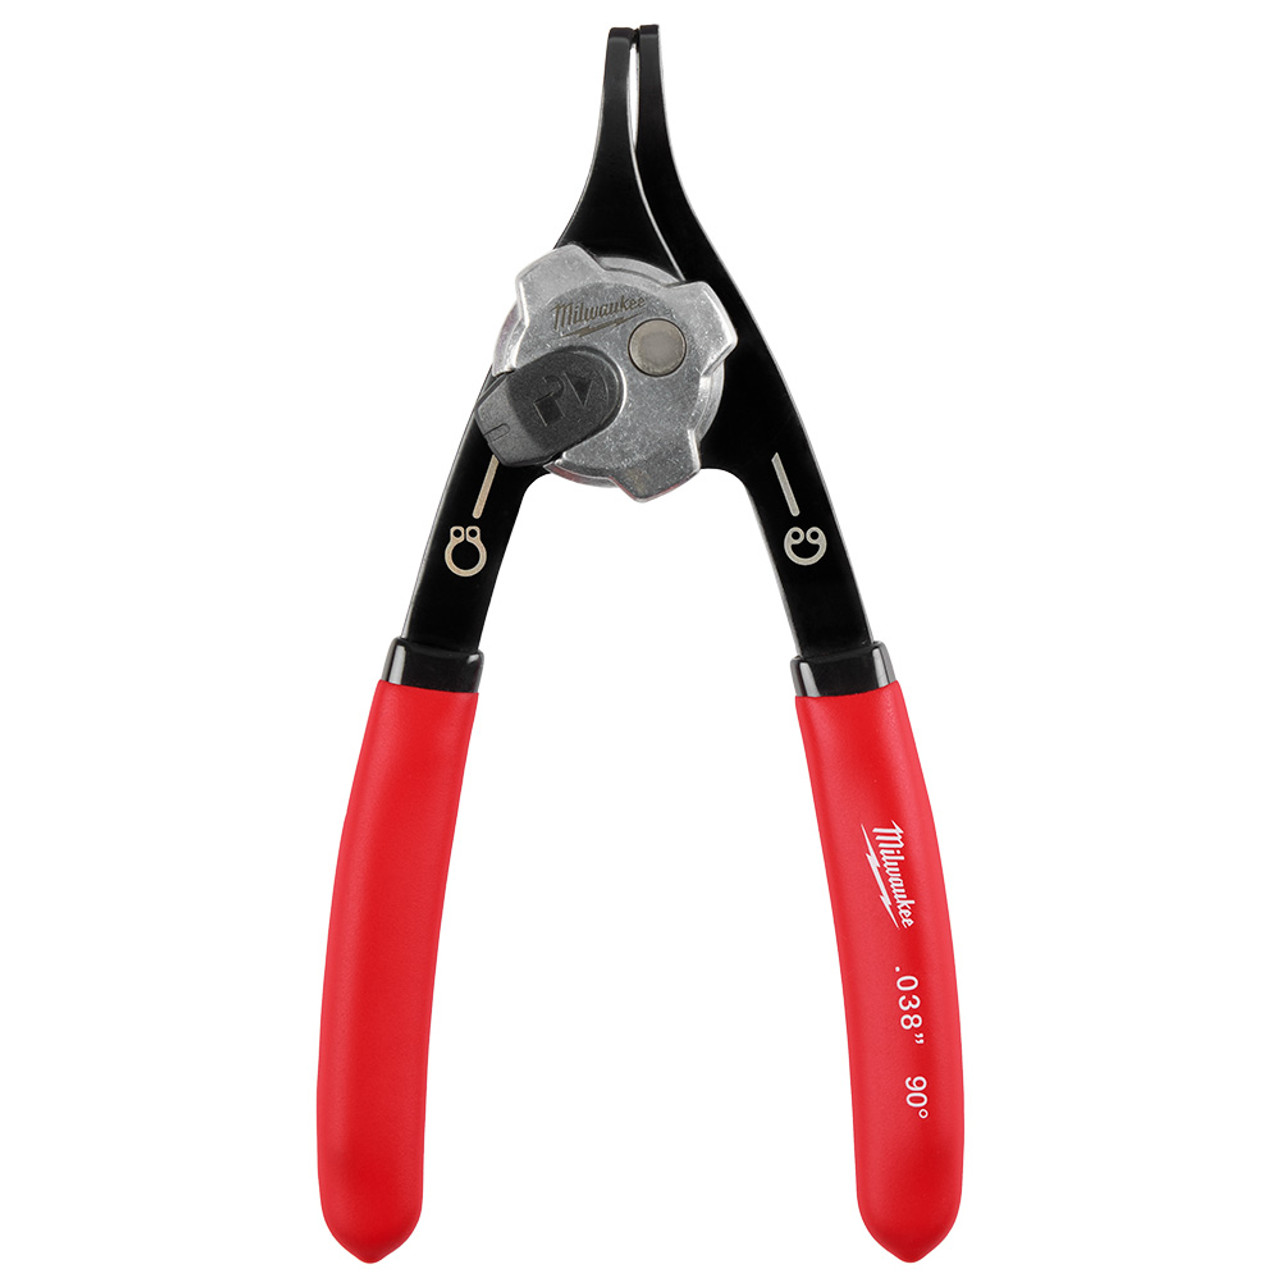 OEMTOOLS® 4-in-1 Combination Snap Ring Pliers, 4-pc, 44012 | Canadian Tire